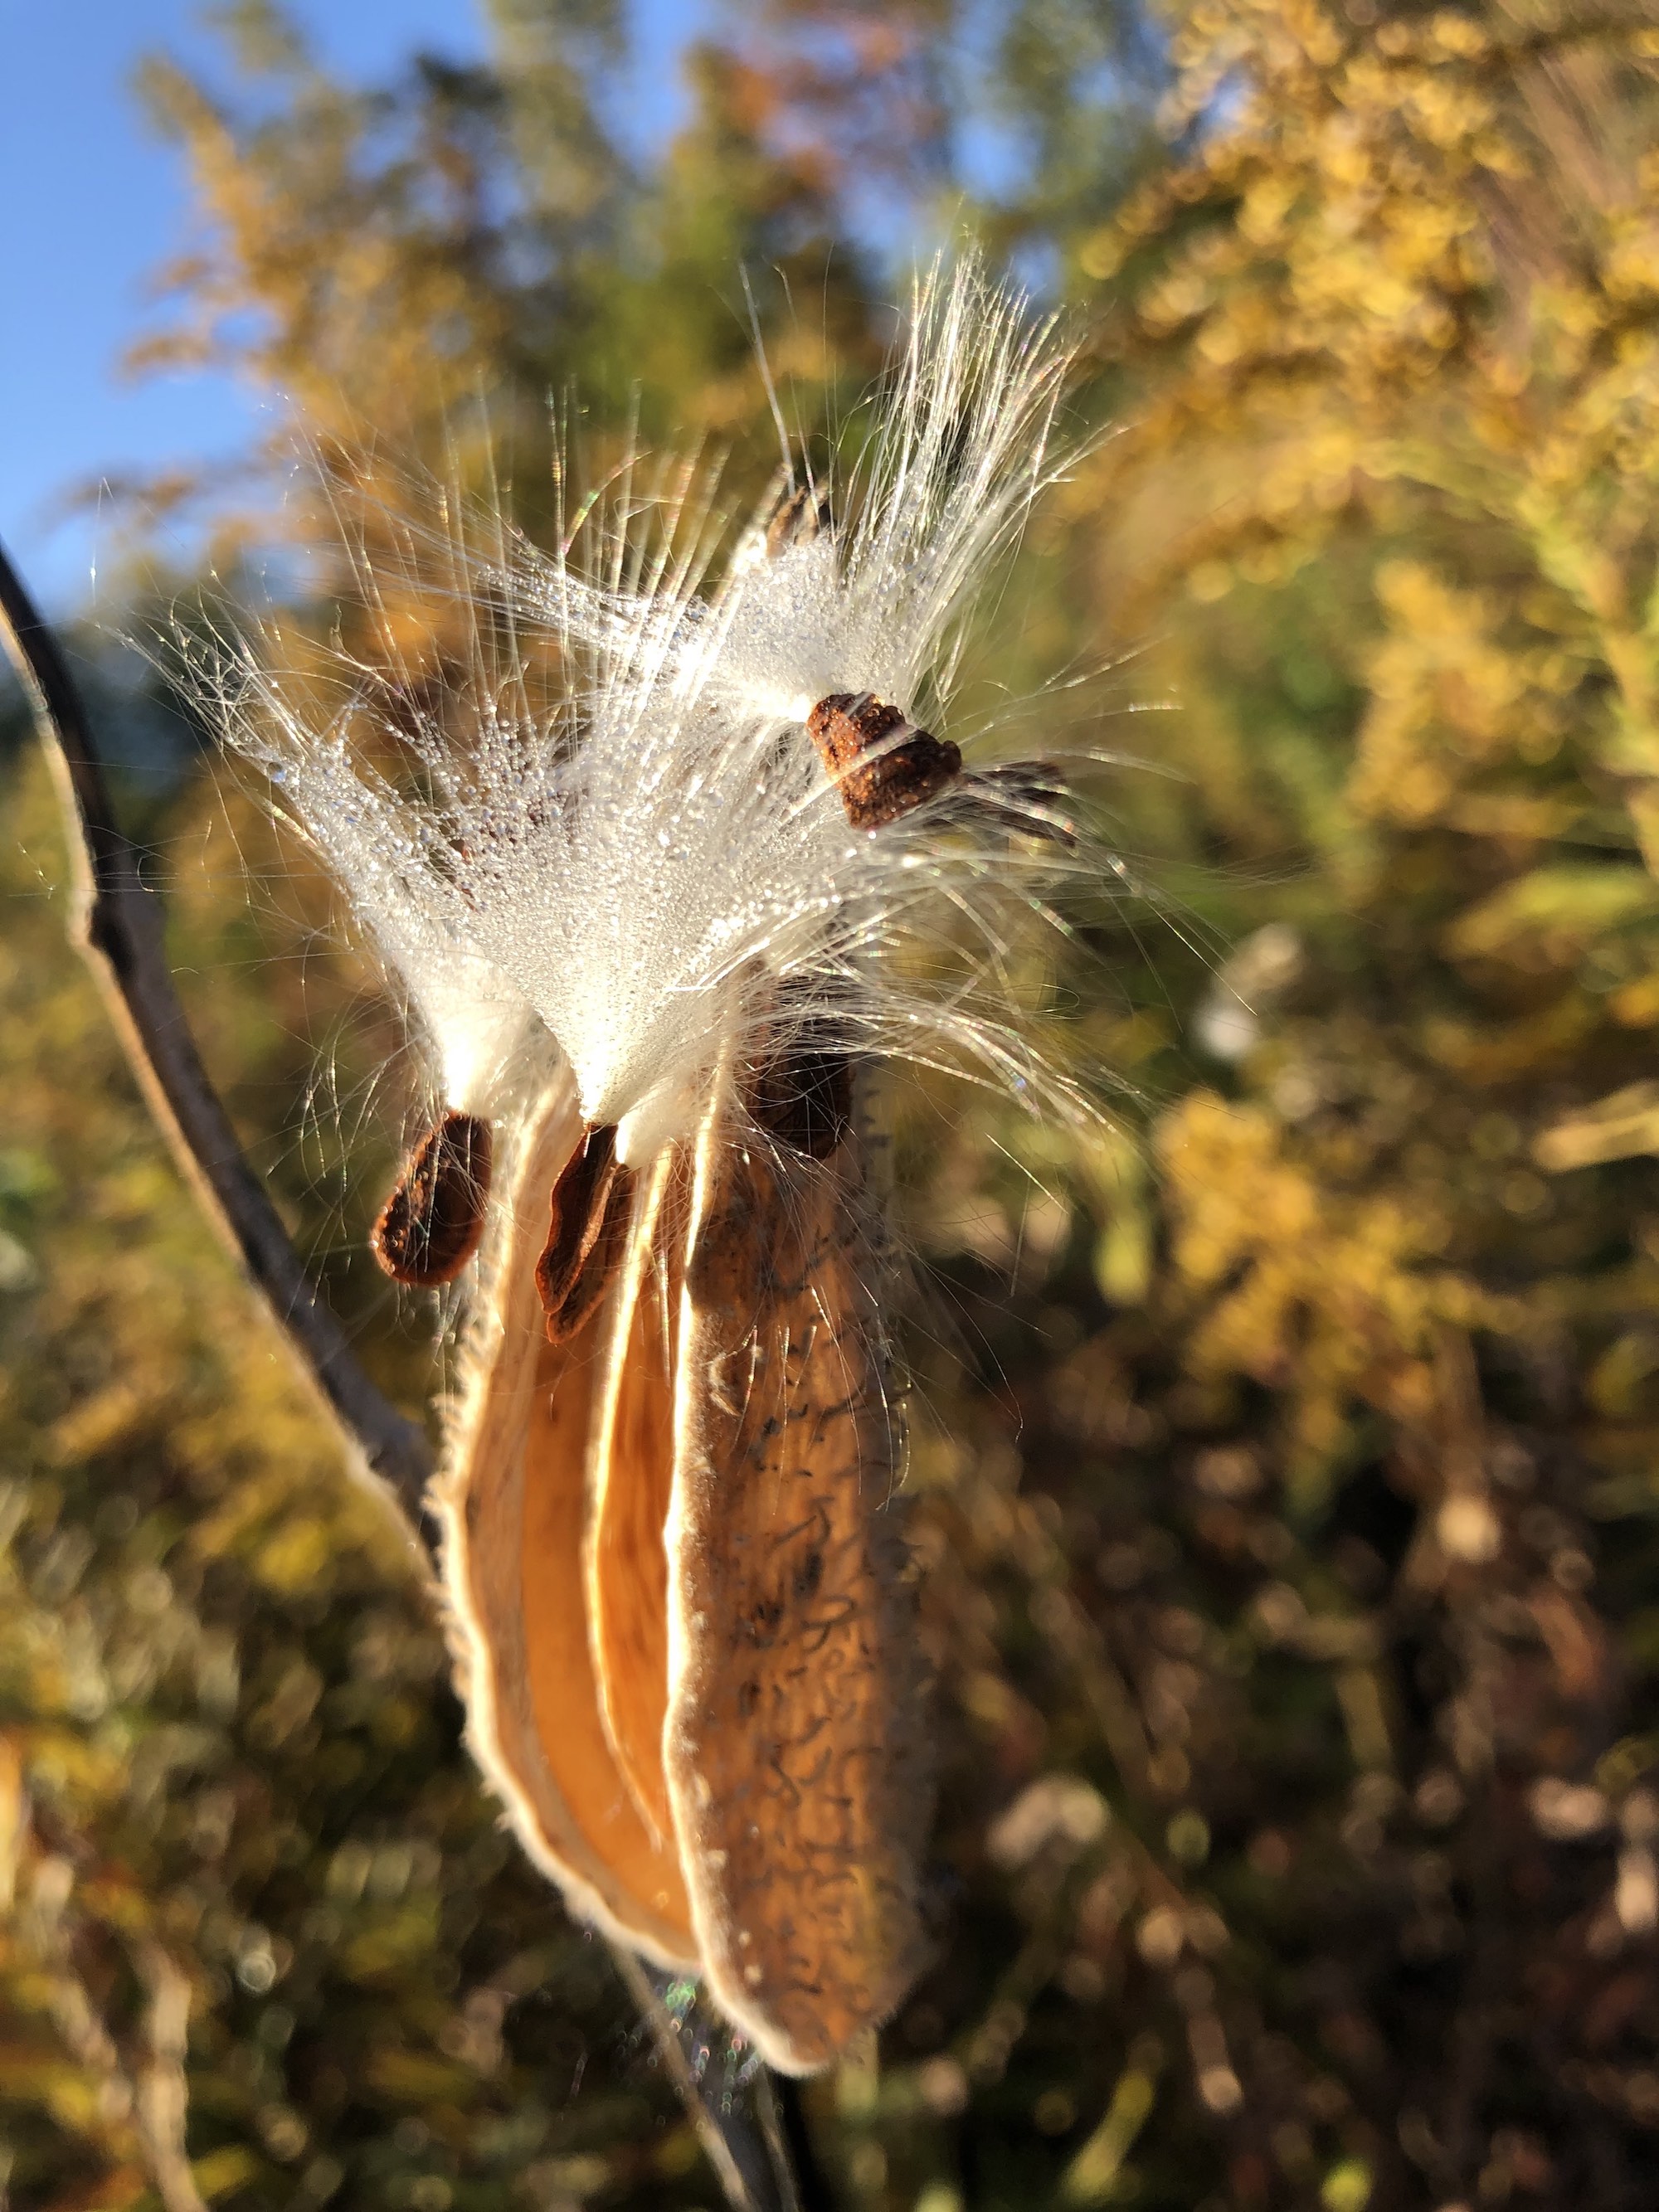 Common Milkweed on shore of Marion Dunn Pond on October 8, 2020.